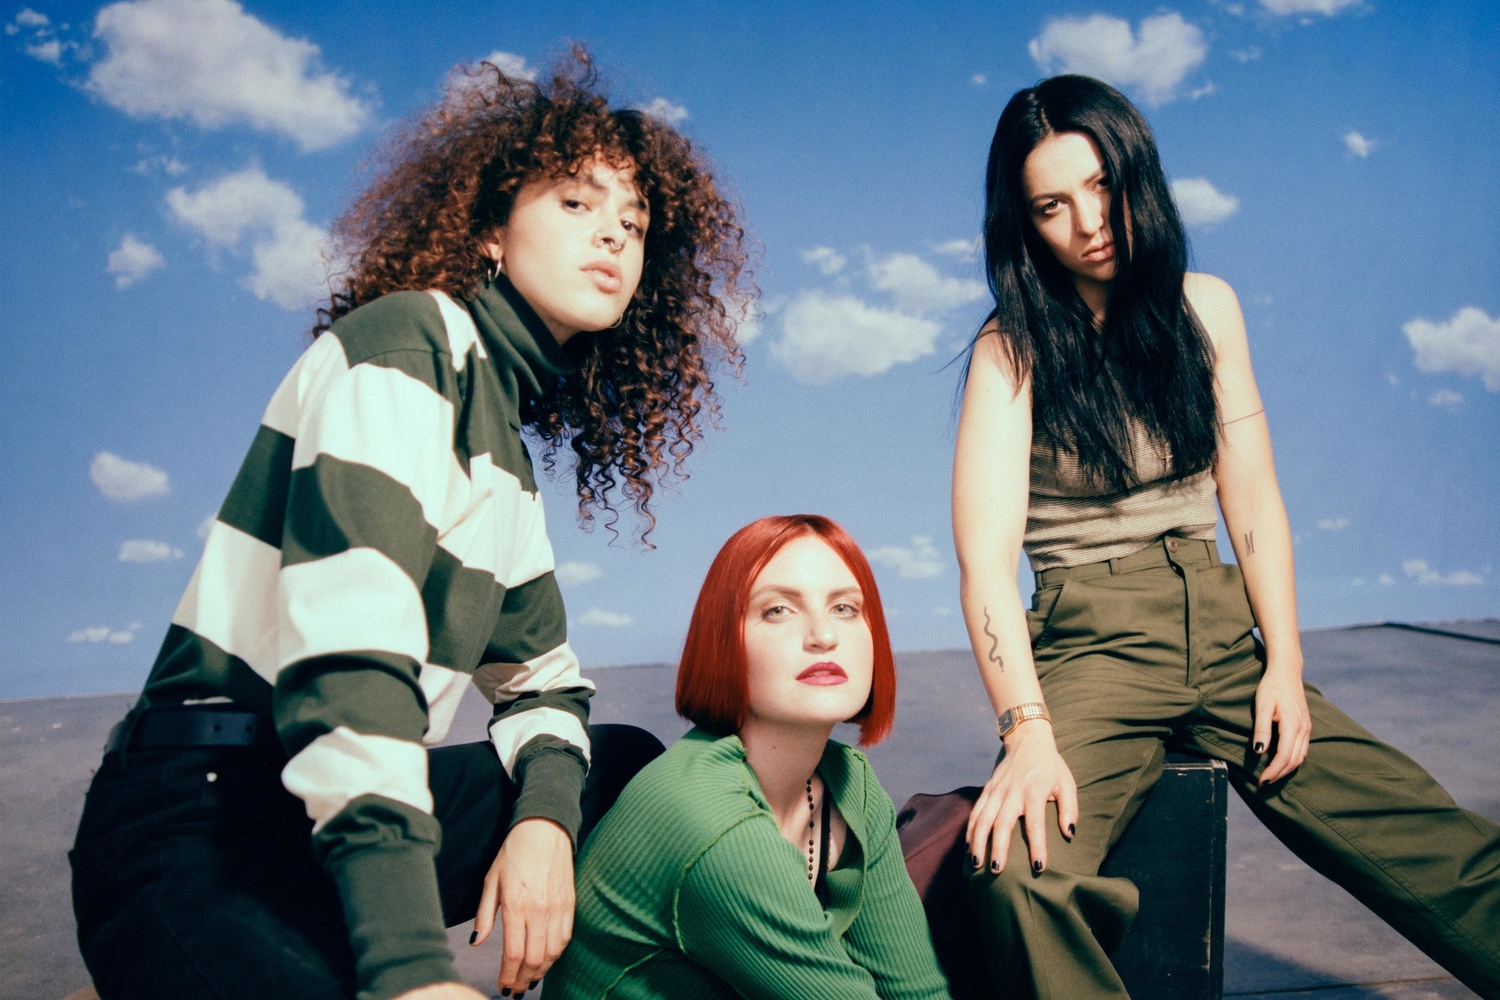 MUNA are coming to London